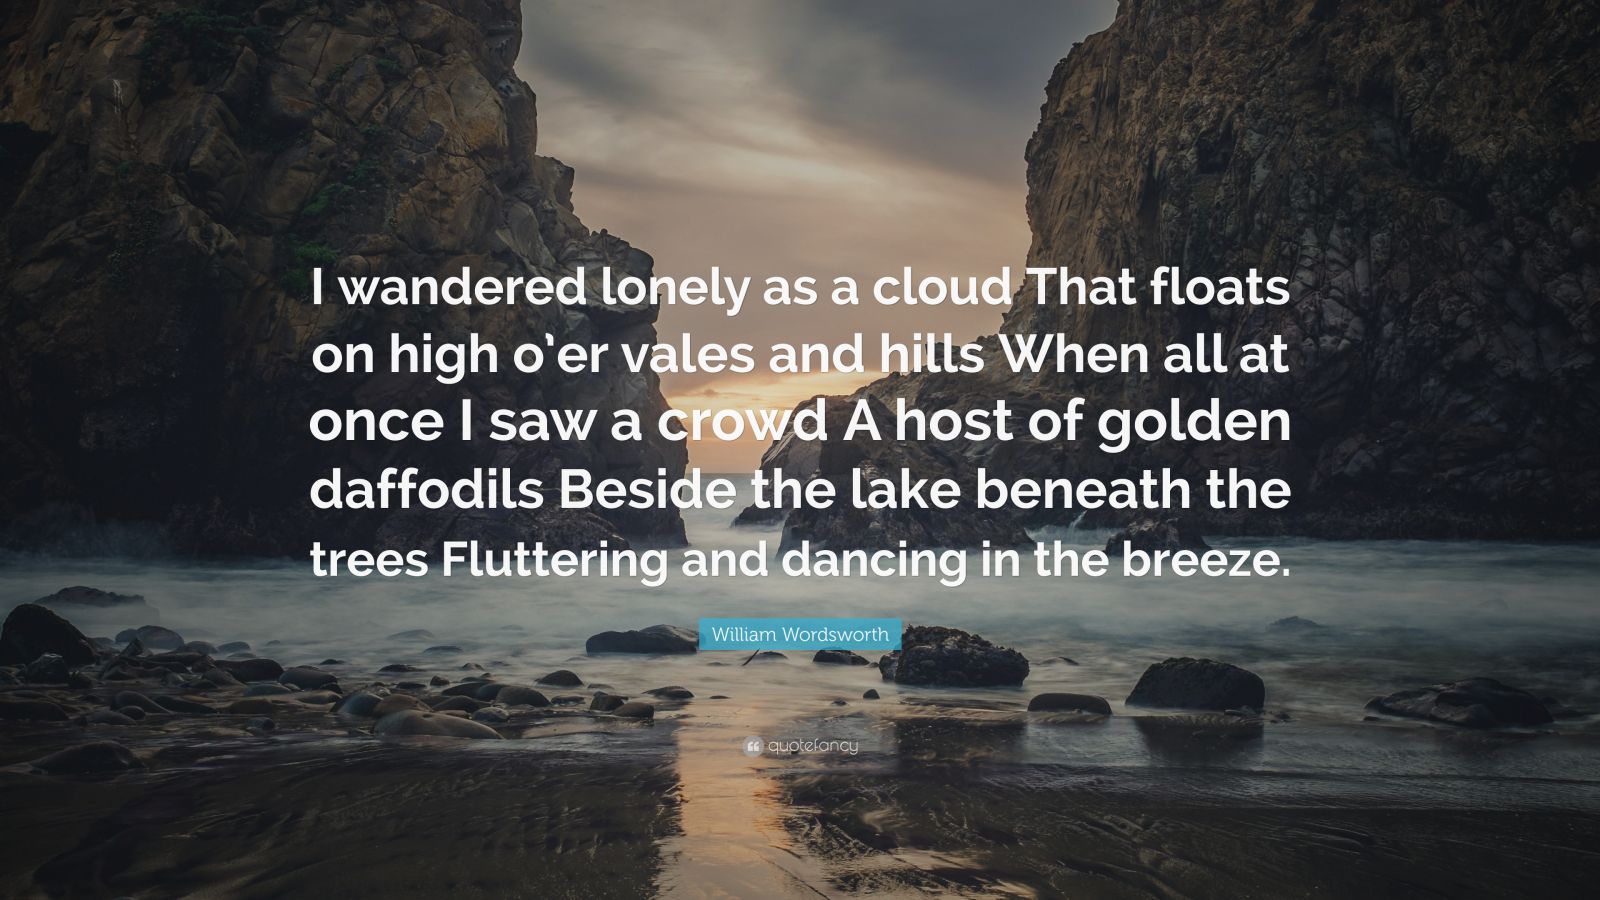 william wordsworth i wandered lonely as a cloud analysis